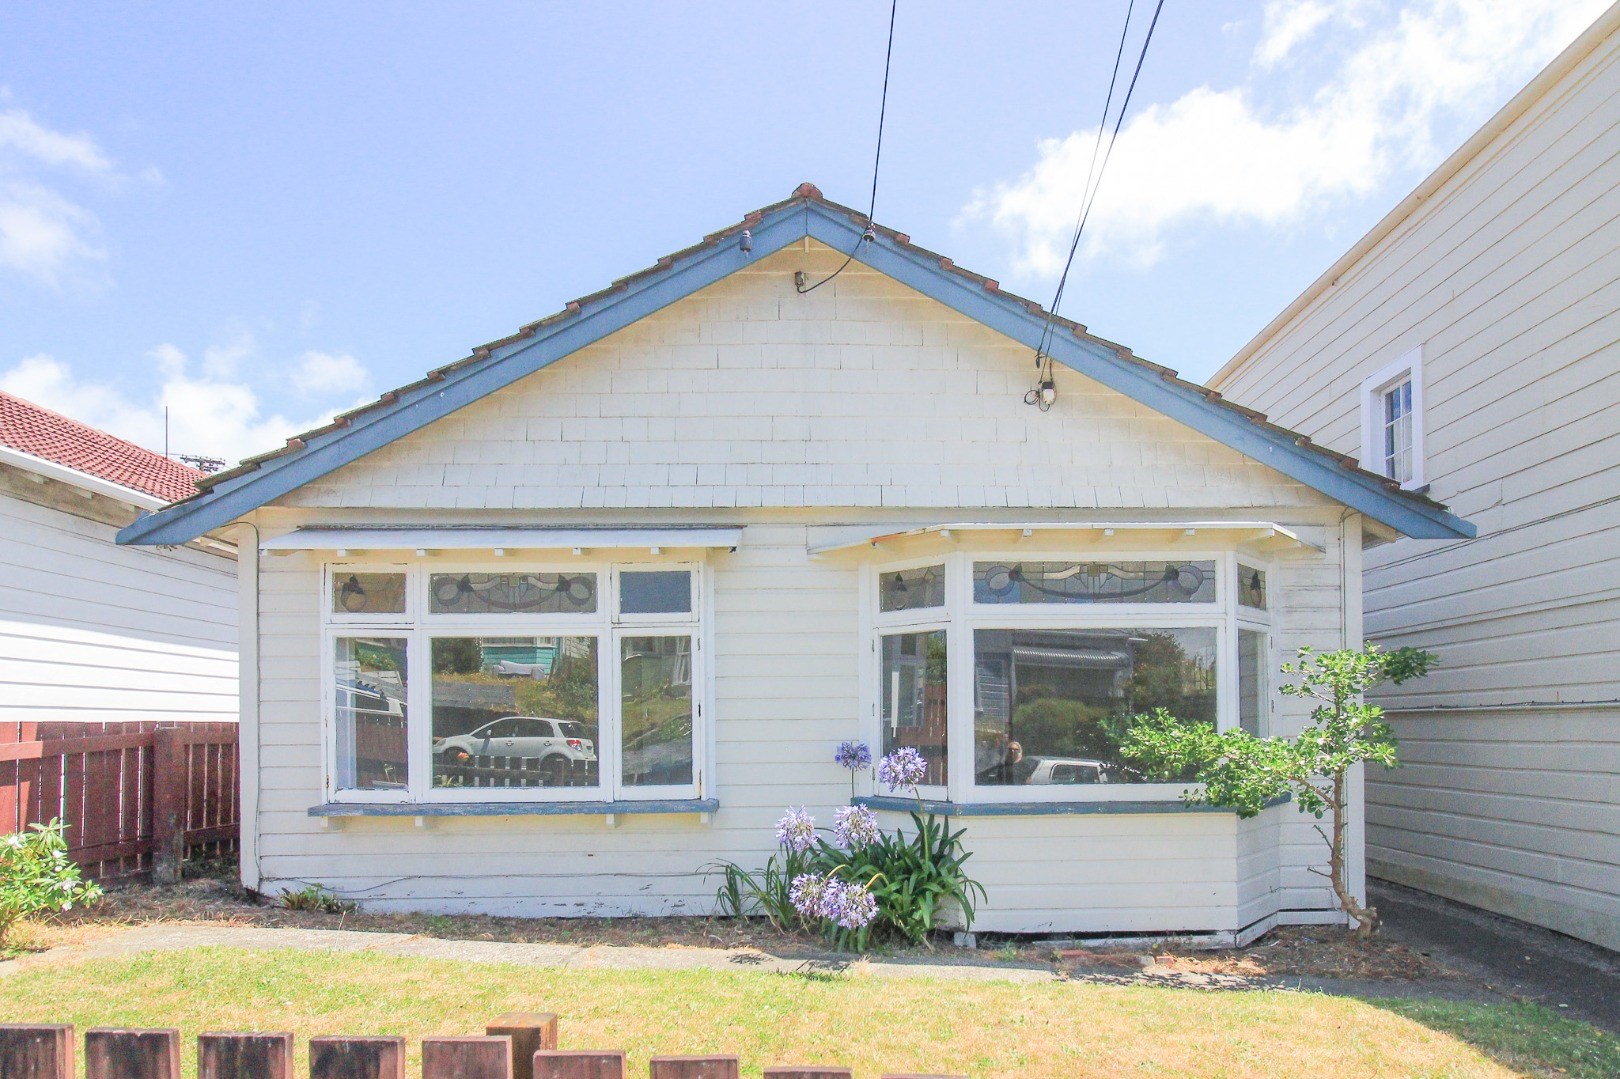 Real Estate For Rent Houses & Apartments : Spacious Two bedroom, or Three bedroom house with large back yard, Wellington